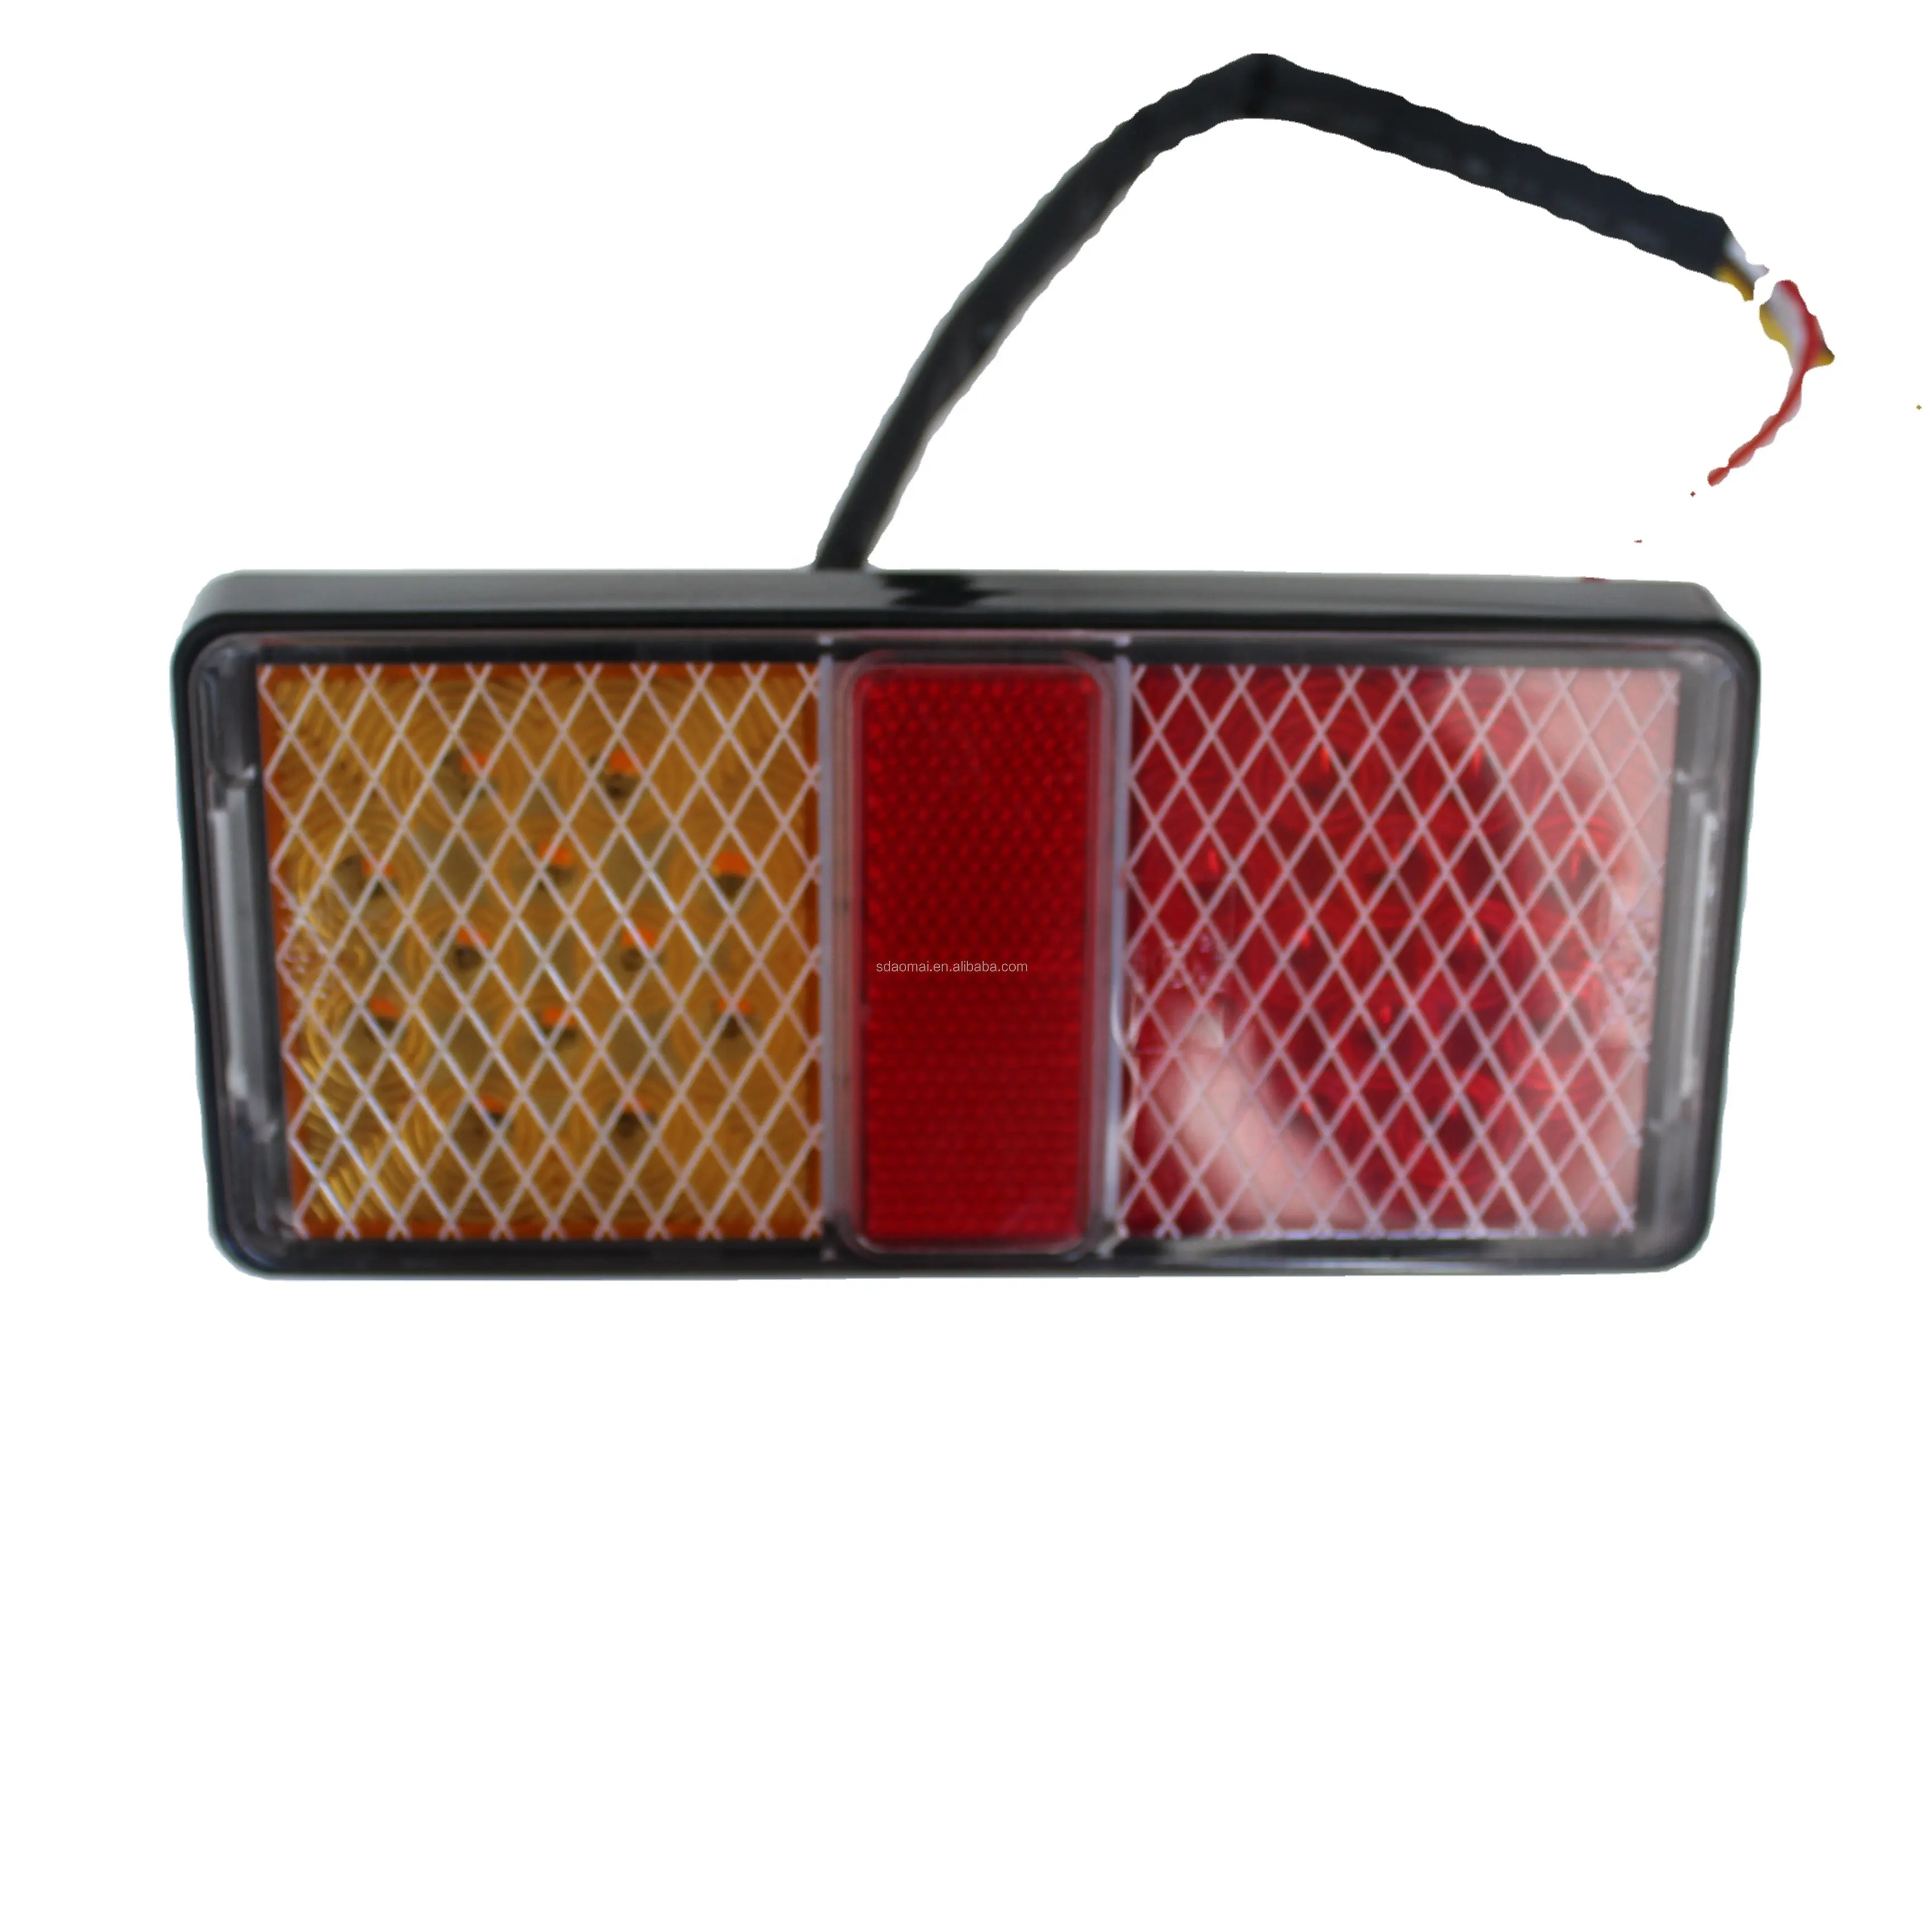 Trailer Tail Light Factory Directly Supply High Quality Led Ledtaillight tail light led